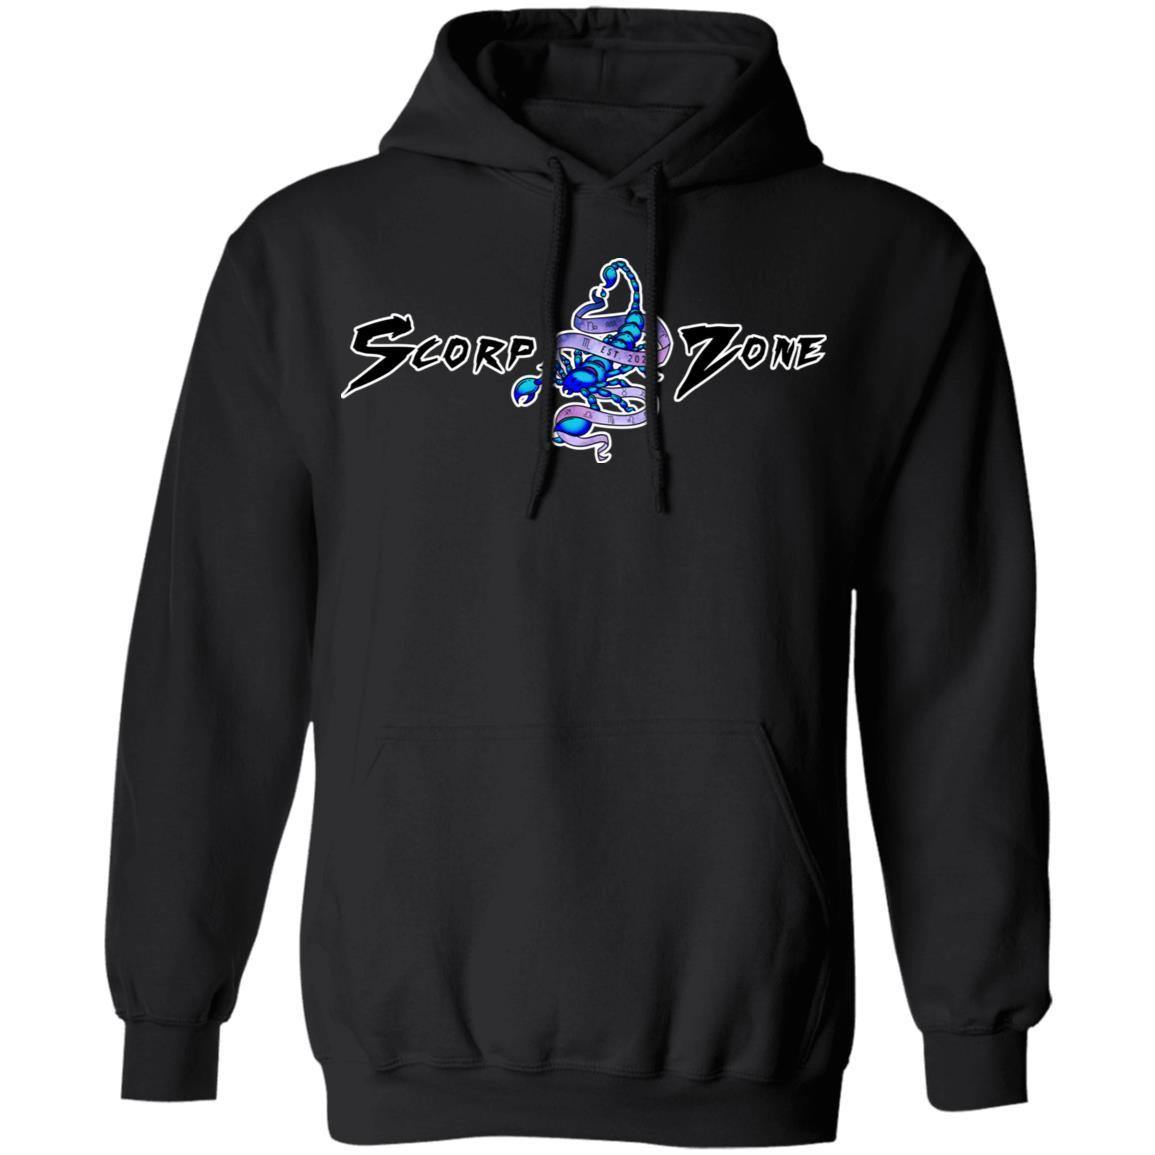 CAPRICORN DESIGN ON BACK AND SMALL SCORP ZONE LOGO ON FRONT - Z66 Pullover Hoodie - ScorpZone